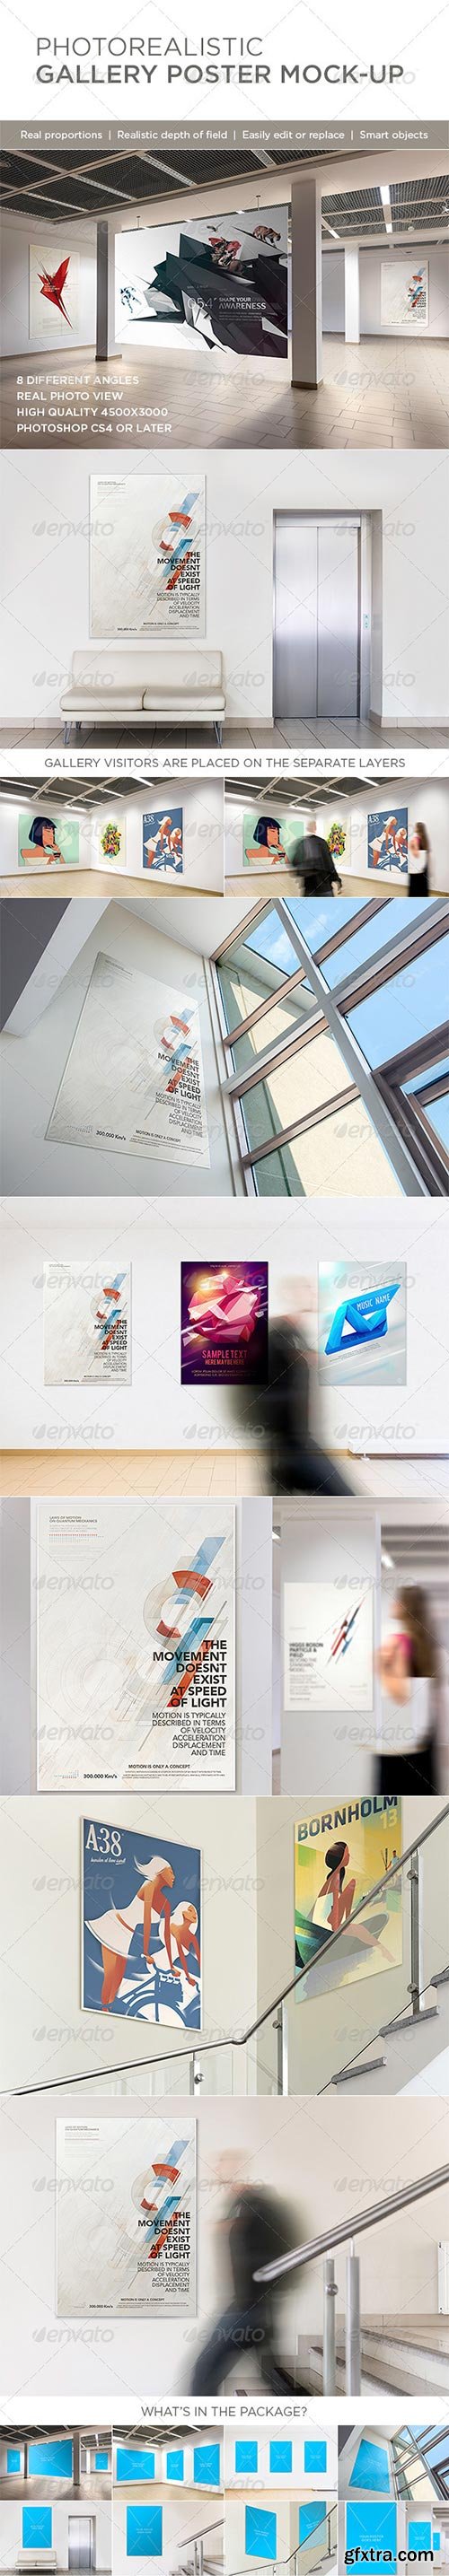 GraphicRiver - Photorealistic Gallery Poster Mock-Up